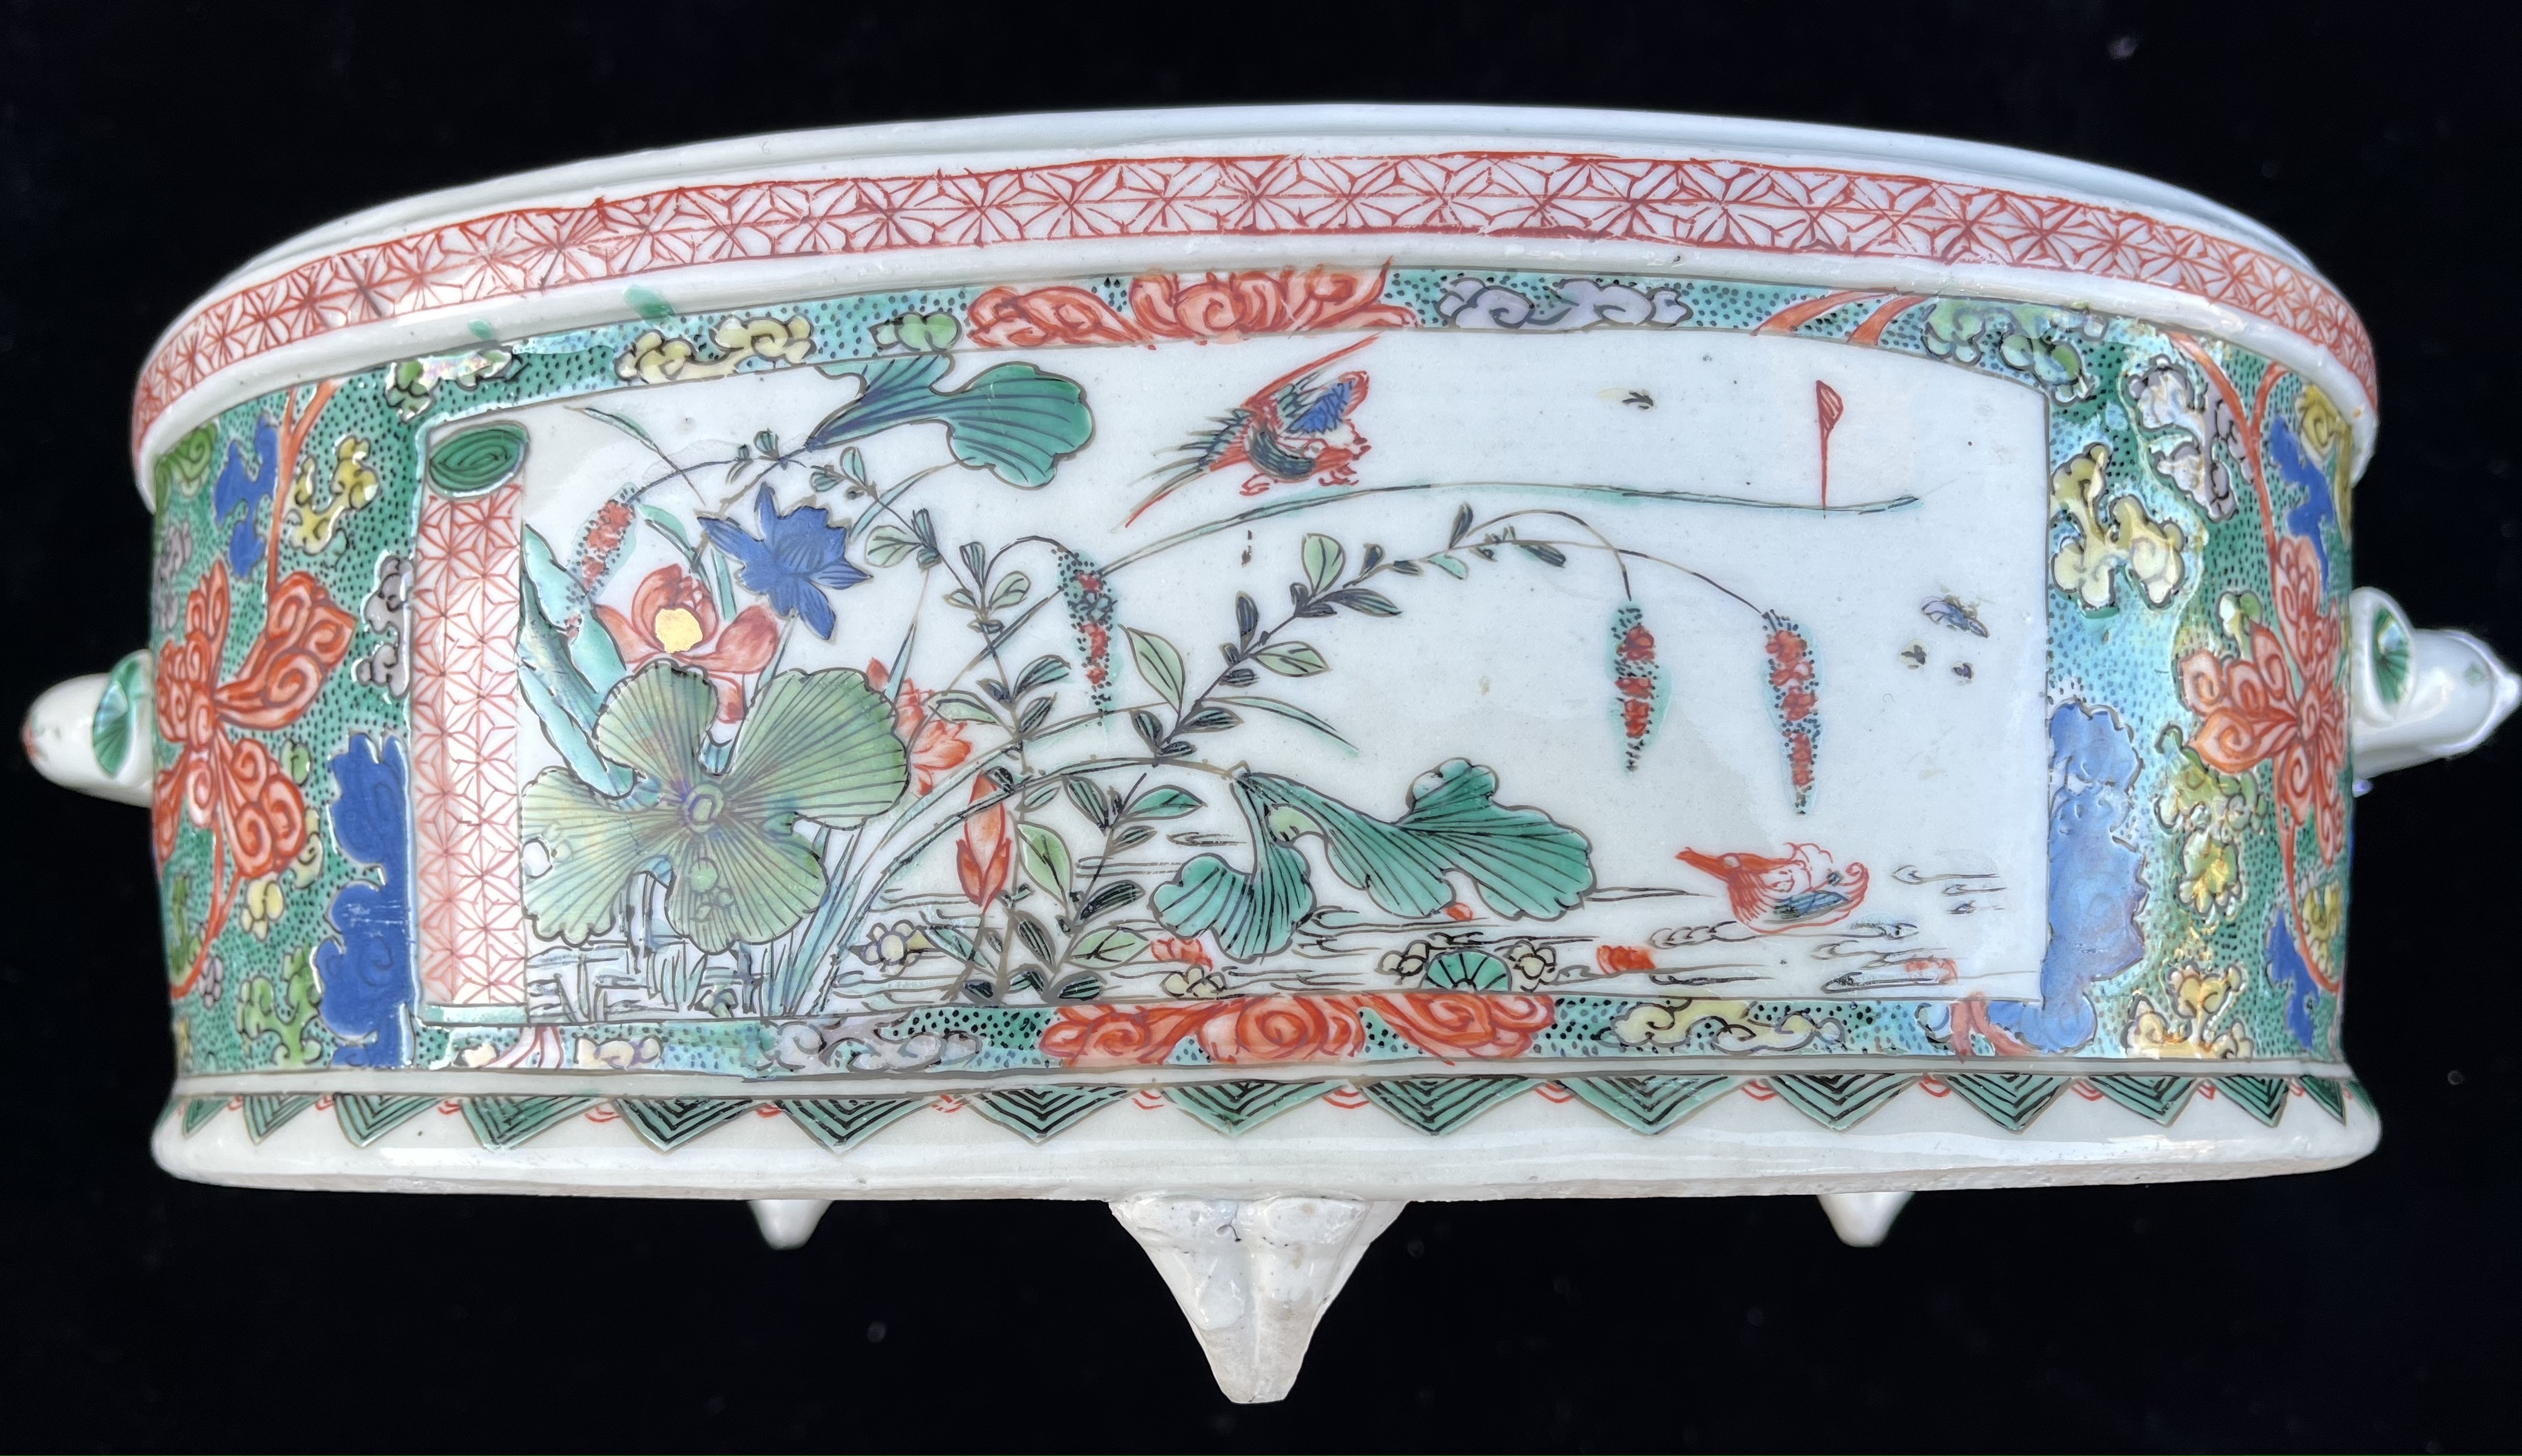 A CHINESE ‘FAMILLE-VERTE’ PORCELAIN OVAL TWO-HANDLED BASIN, QING DYNASTY, KANGXI PERIOD, 1662 – 1722 - Image 4 of 7